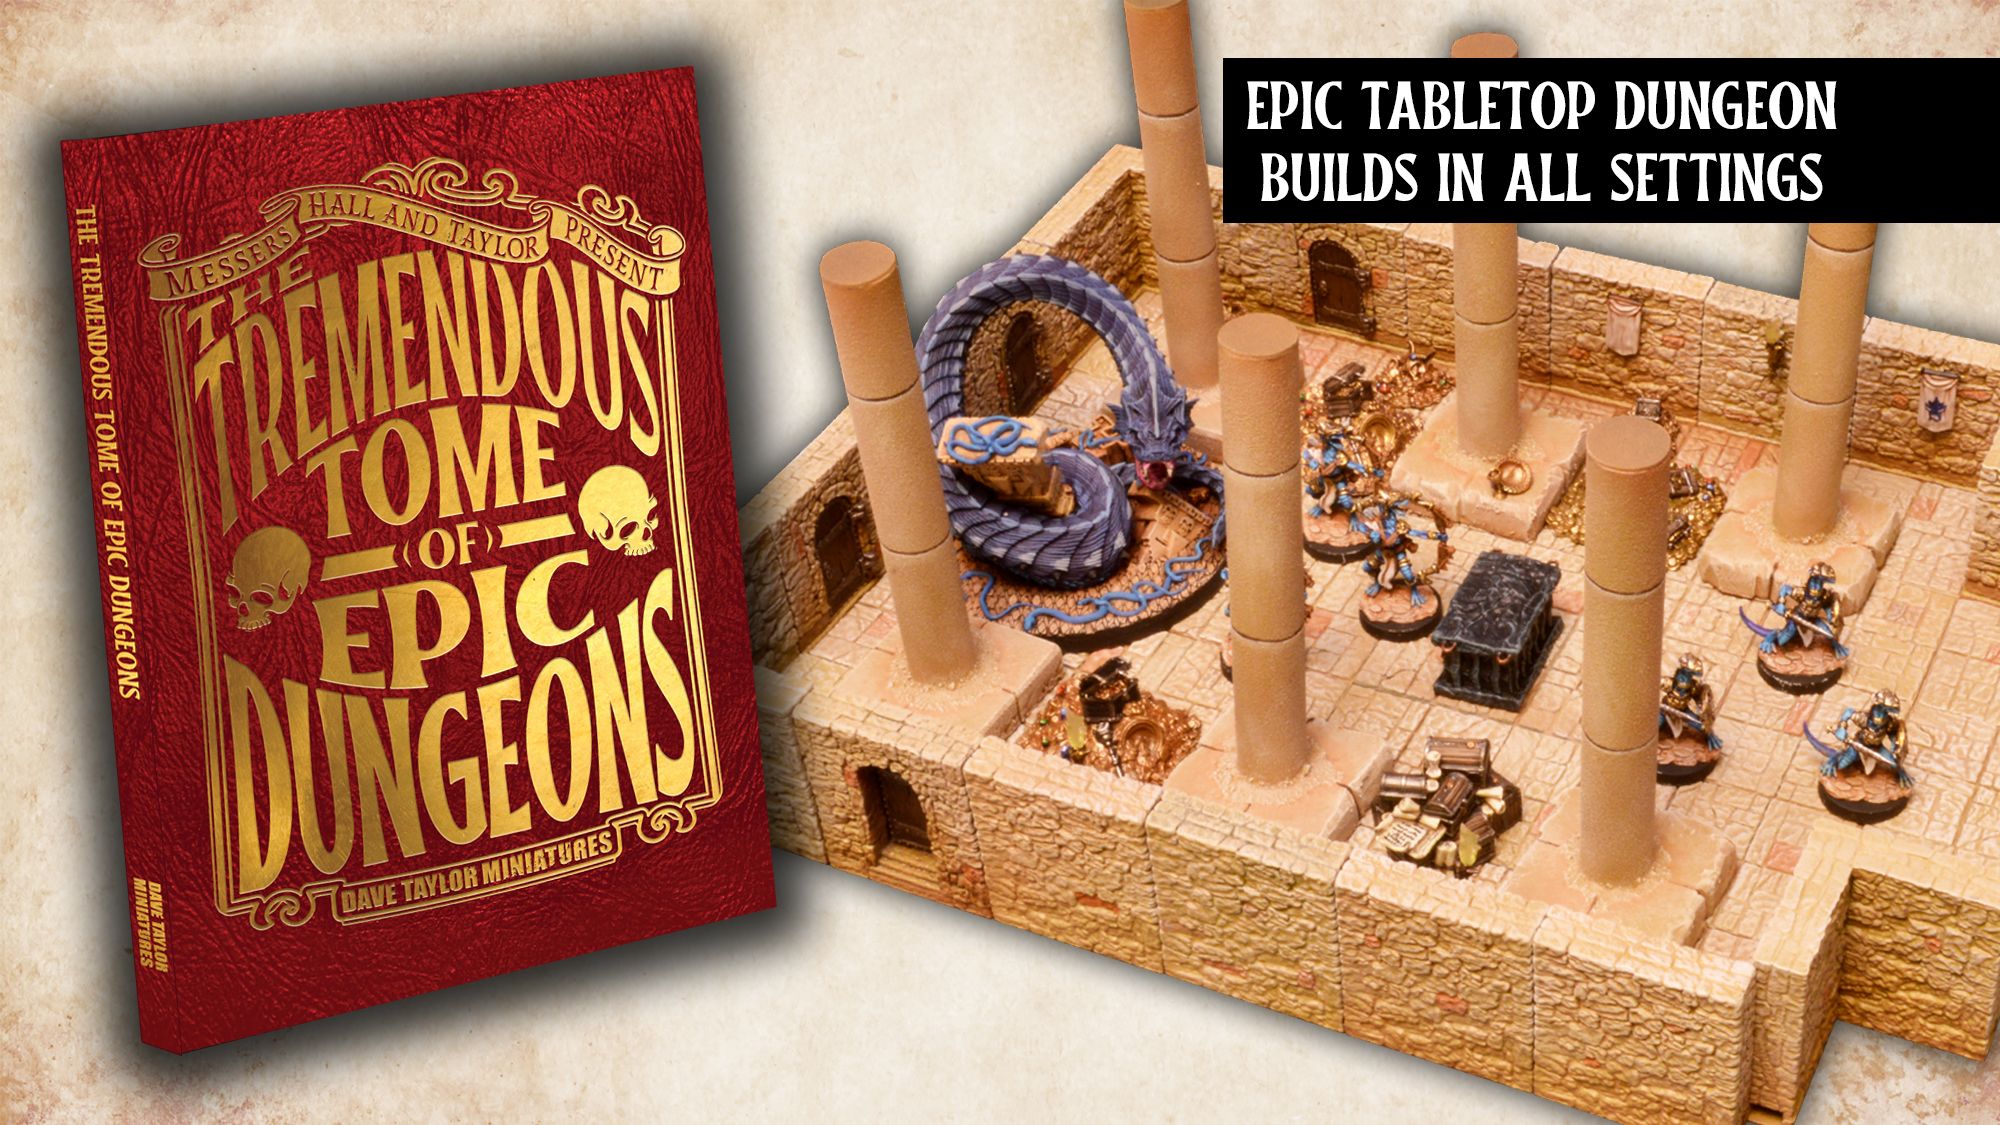 The Tremendous Tome Of Epic Dungeons - Dave Taylor Miniatures